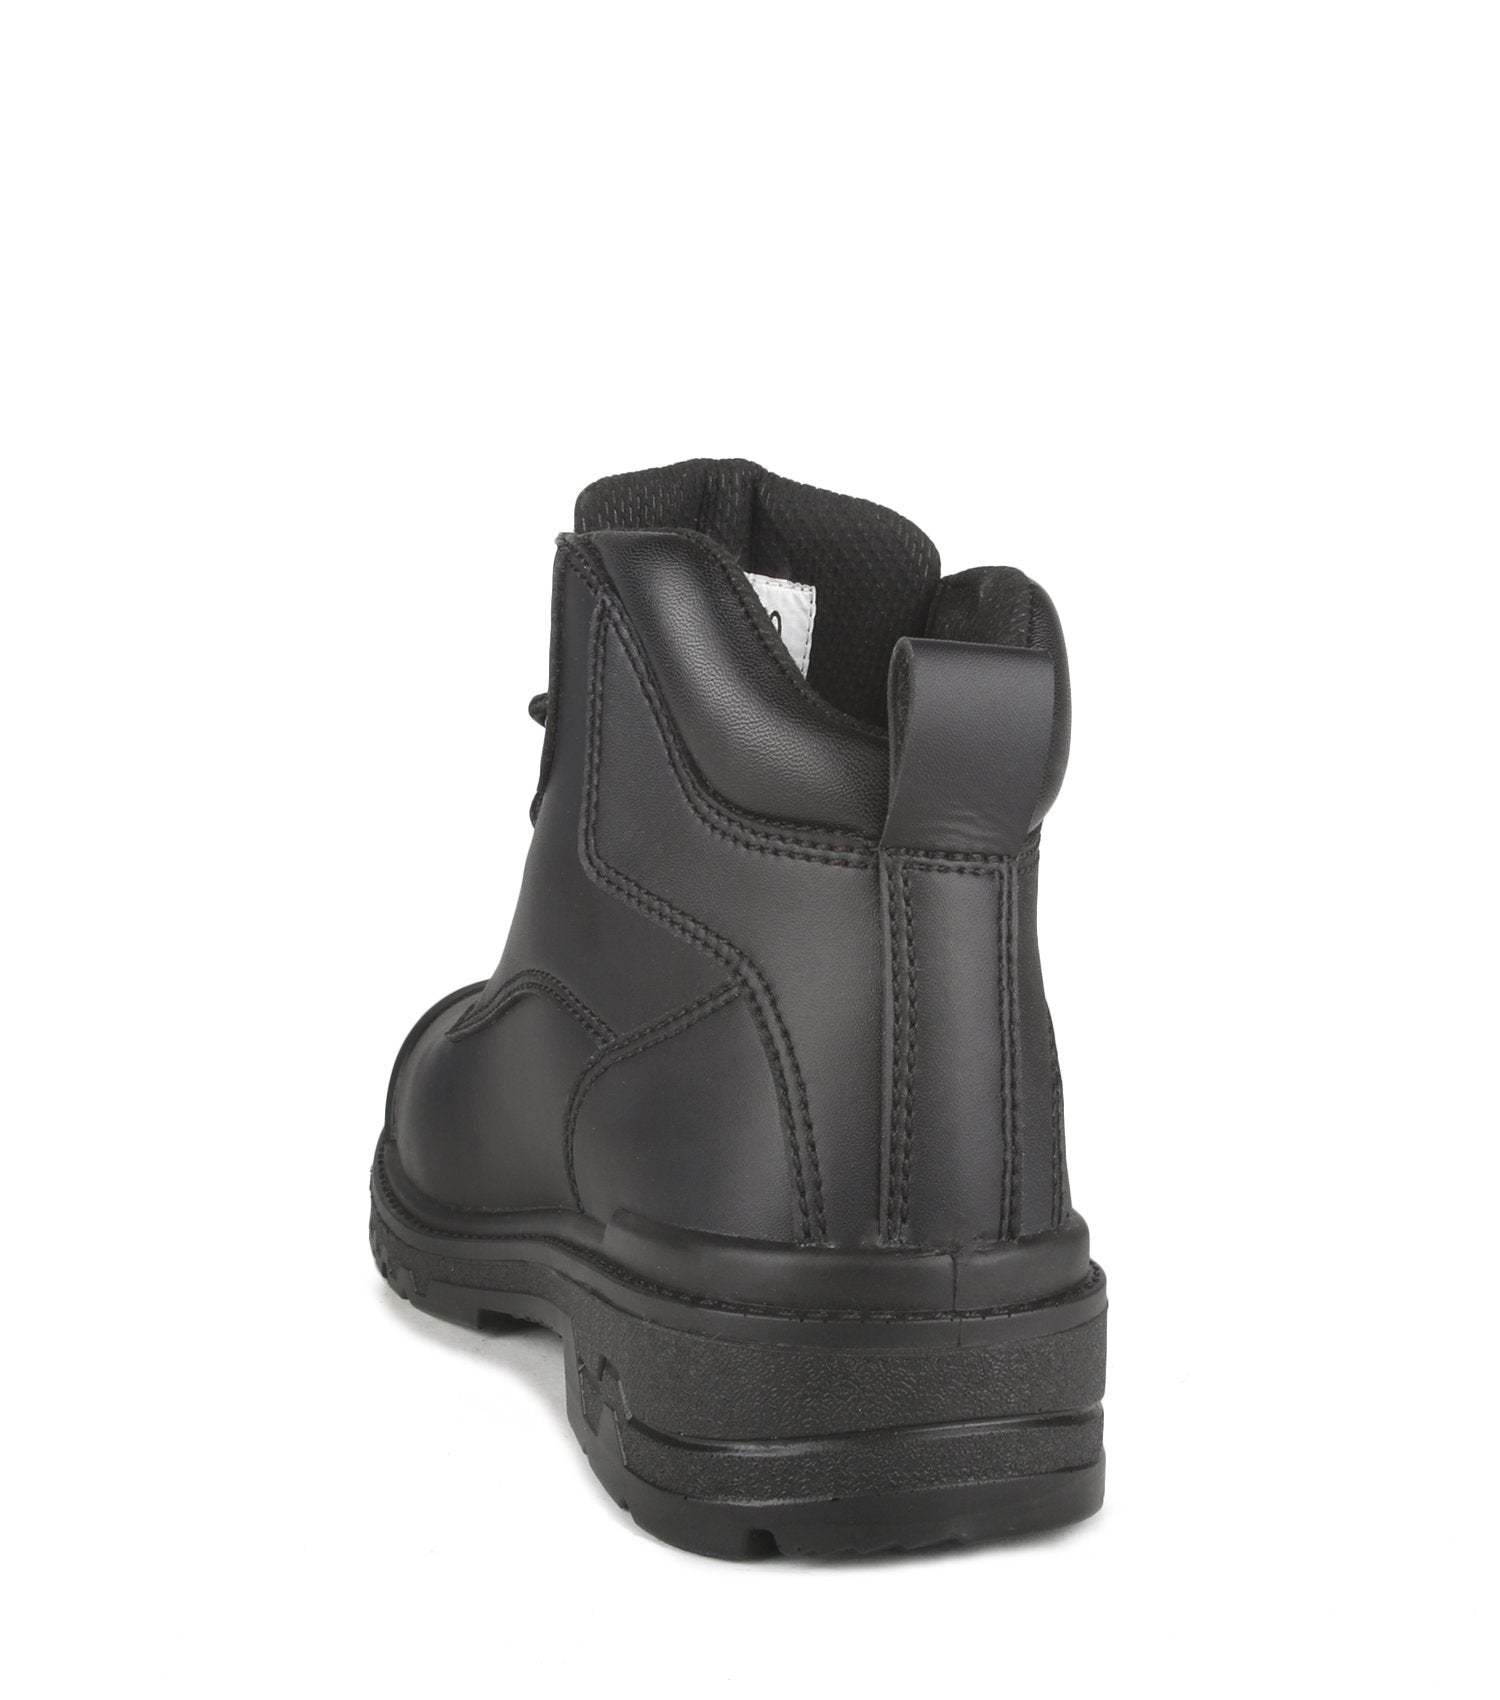 Acton Profiber 6" Chemtech Safety Work Boots | Black | Size 7 to Size 16 Work Boots - Cleanflow